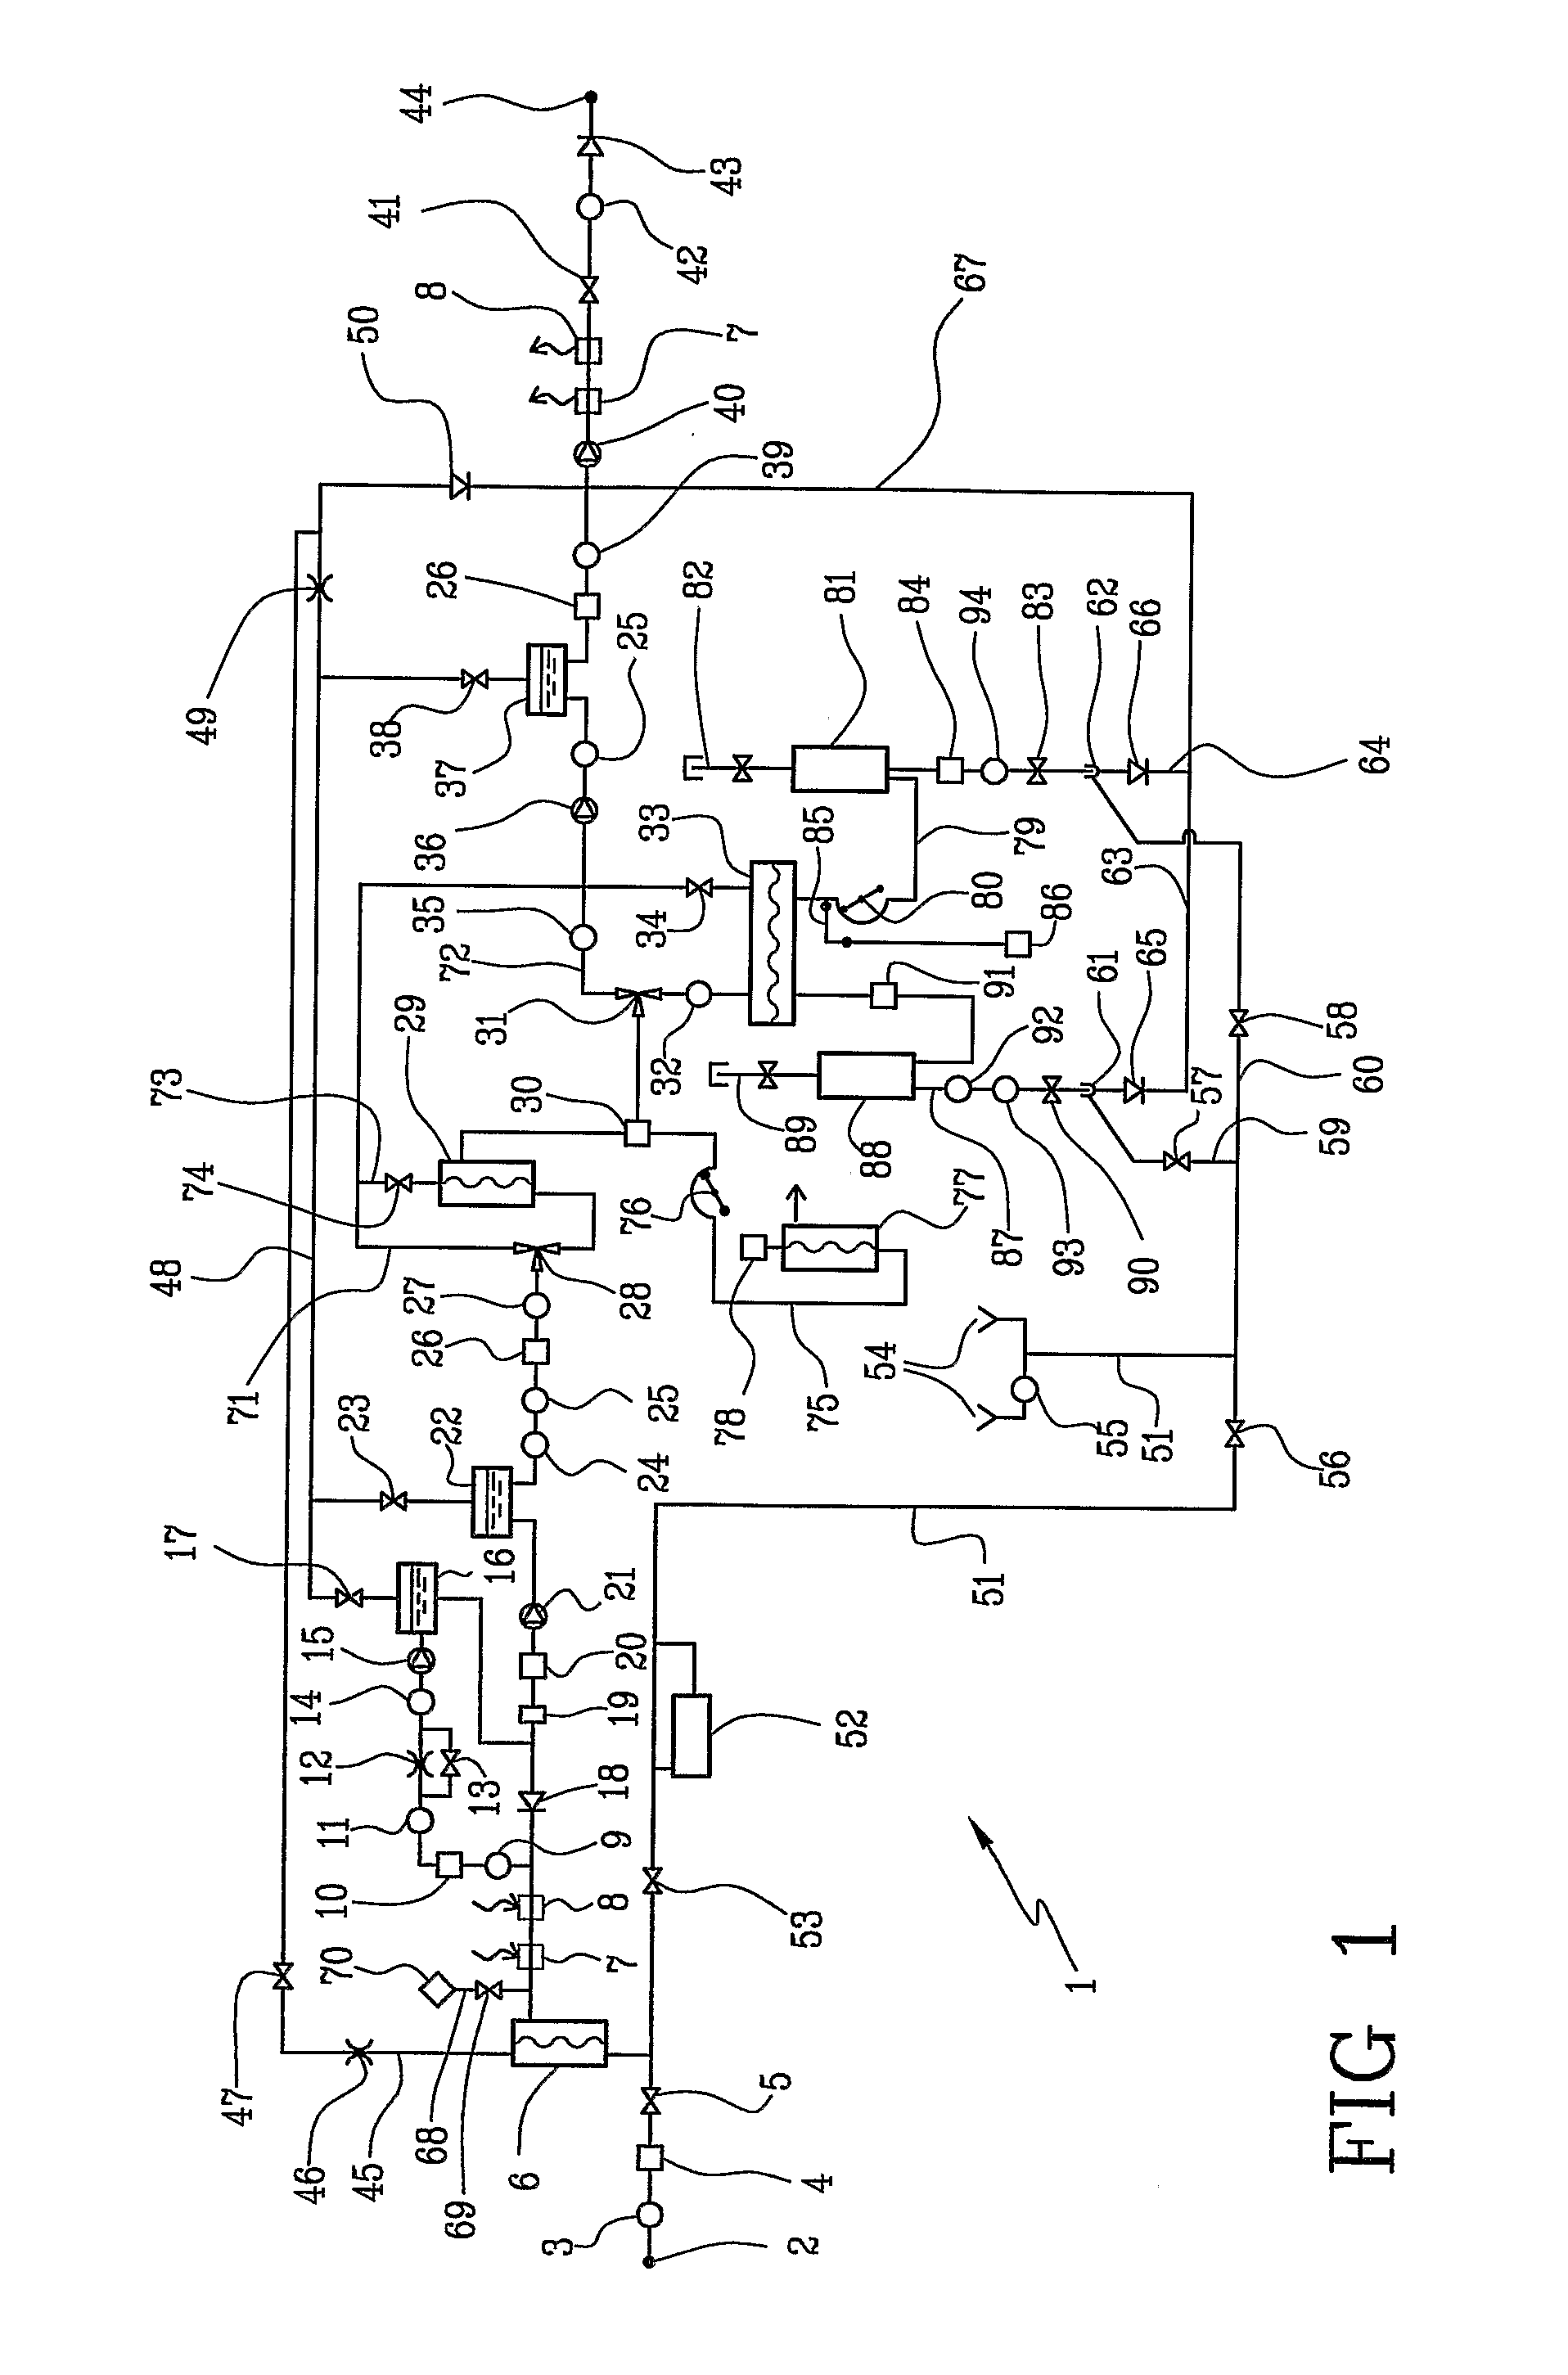 Method and apparatus for priming an extracorporeal blood circuit